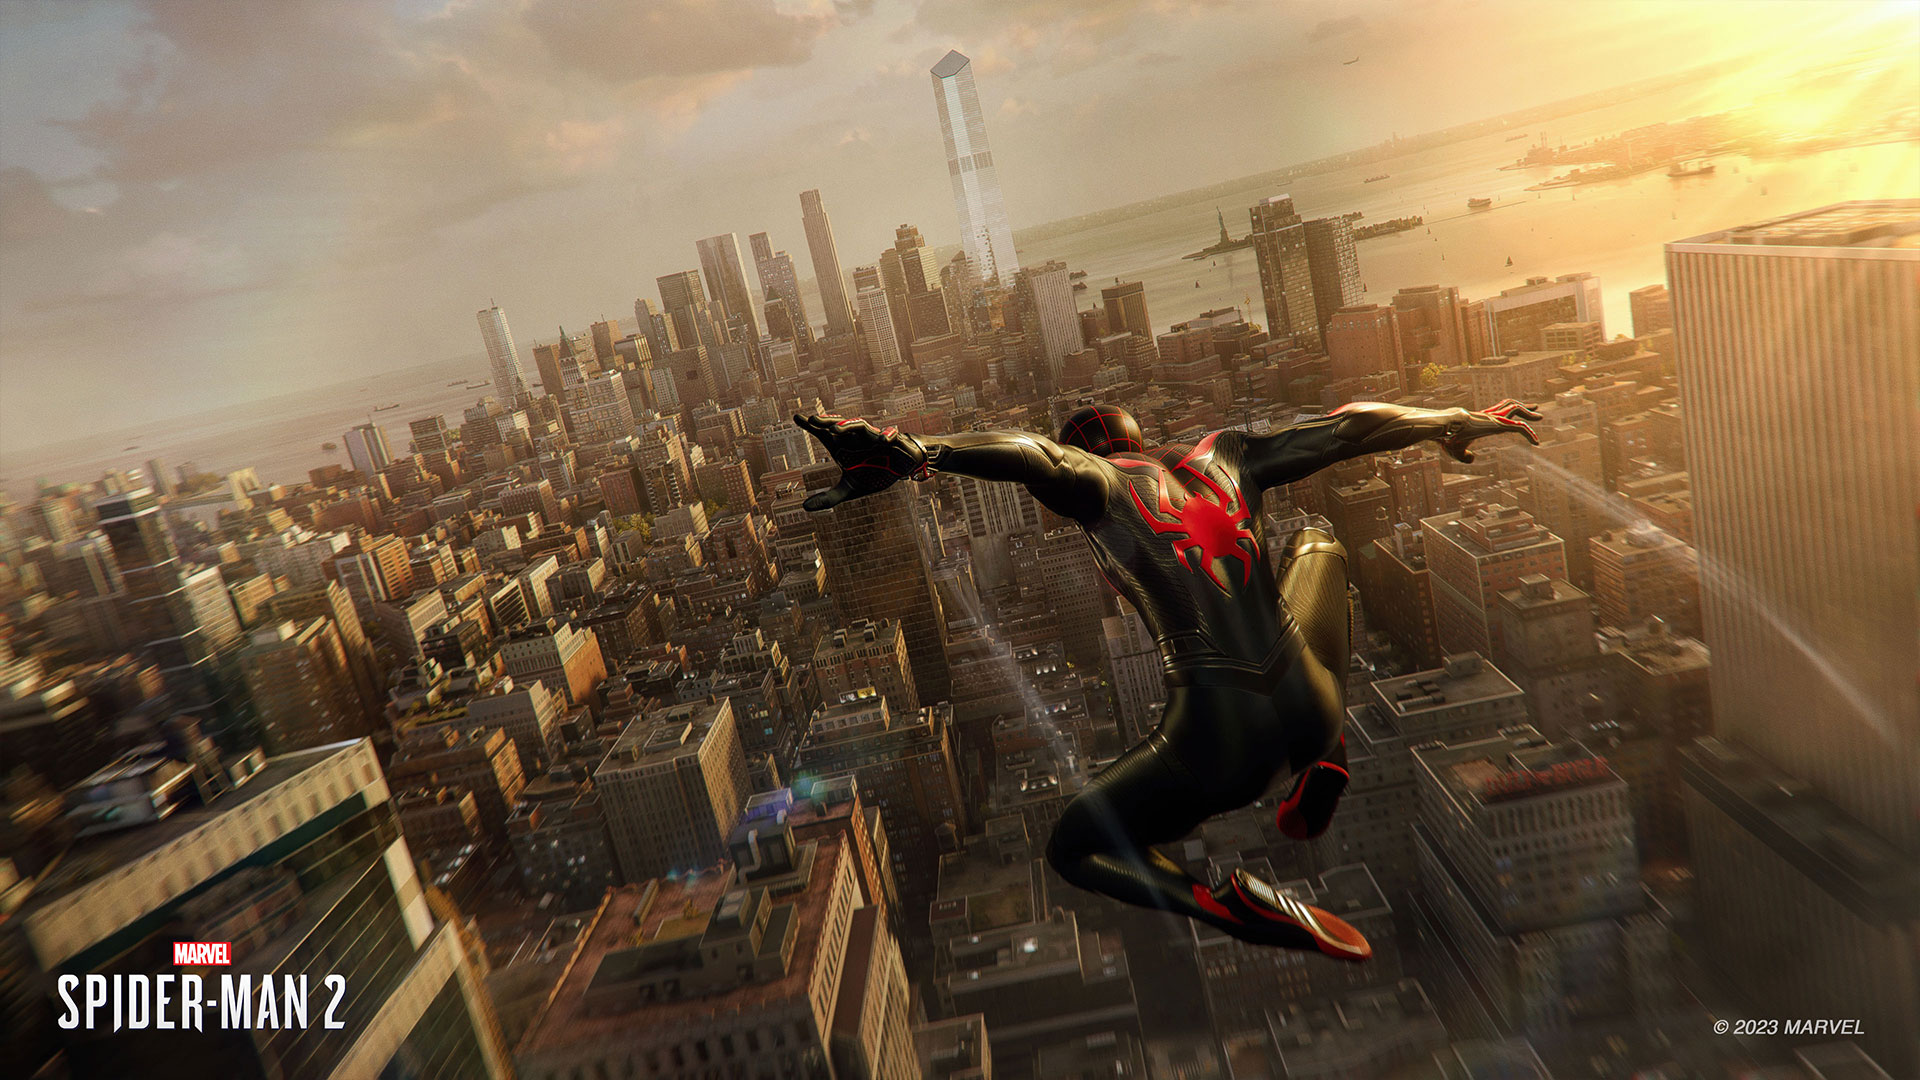 Available Games Online That Feature Spiderman